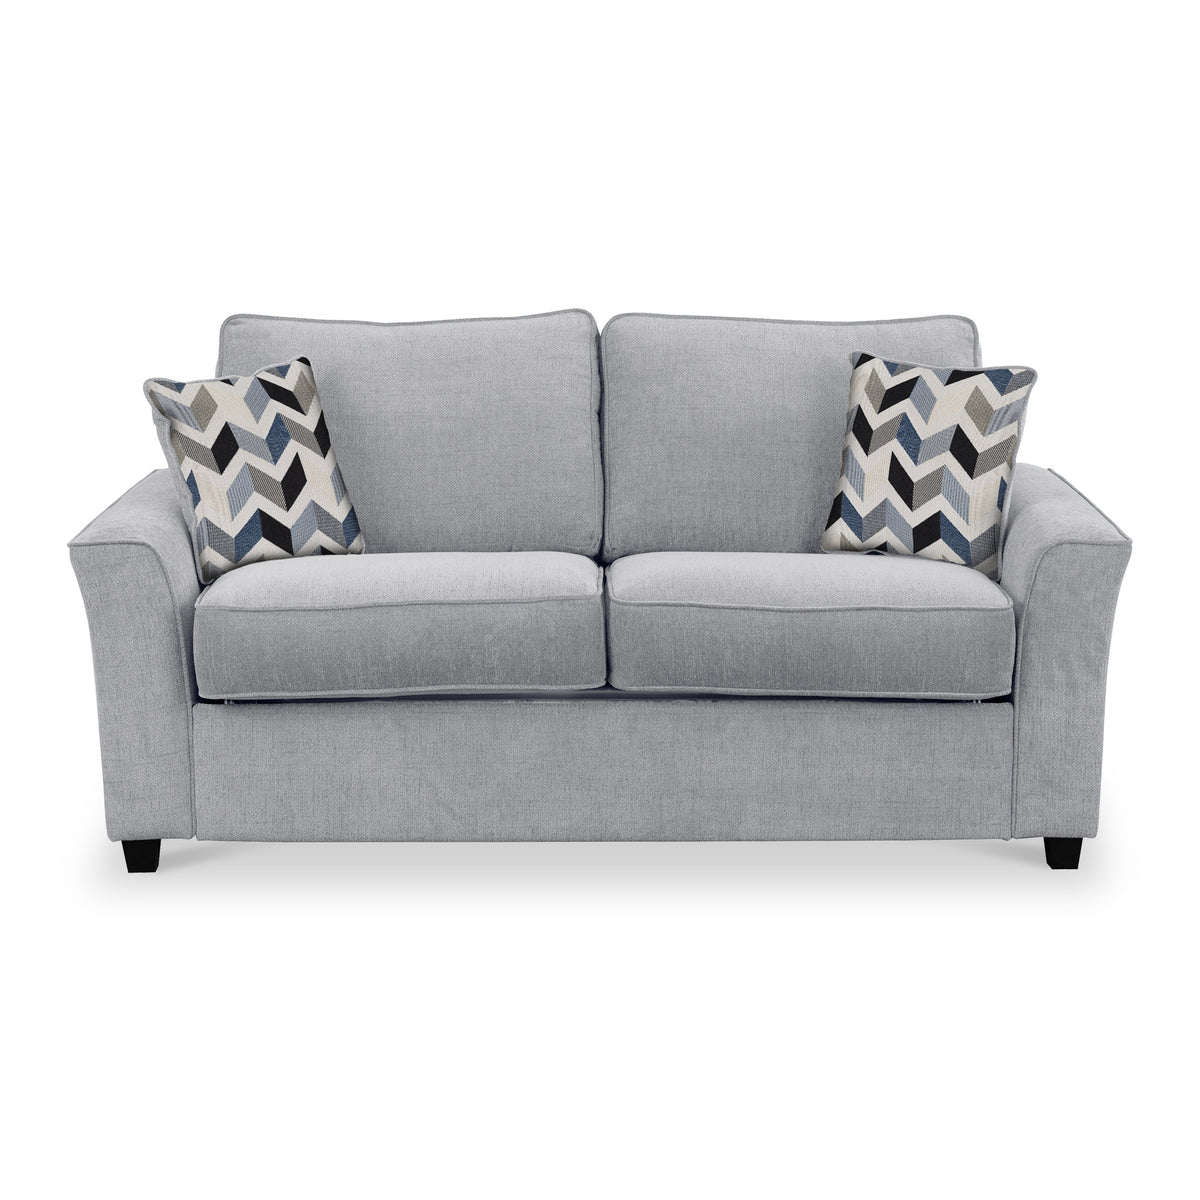 Abbott 2 Seater Sofabed in Silver with Morelisa Denim Cushions by Roseland Furniture